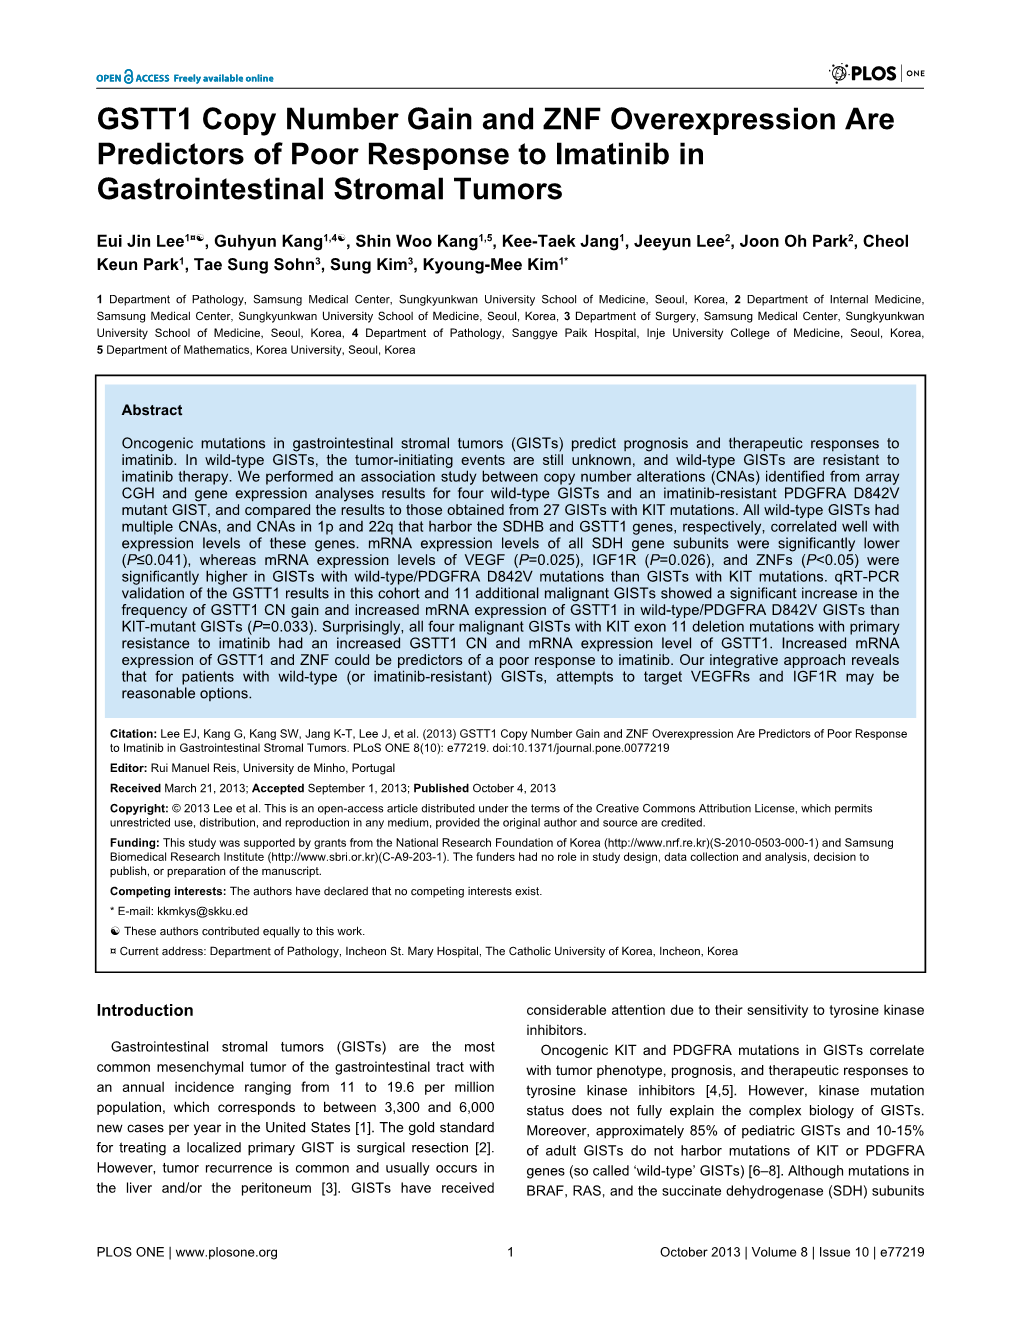 GSTT1 Copy Number Gain and ZNF Overexpression Are Predictors of Poor Response to Imatinib in Gastrointestinal Stromal Tumors